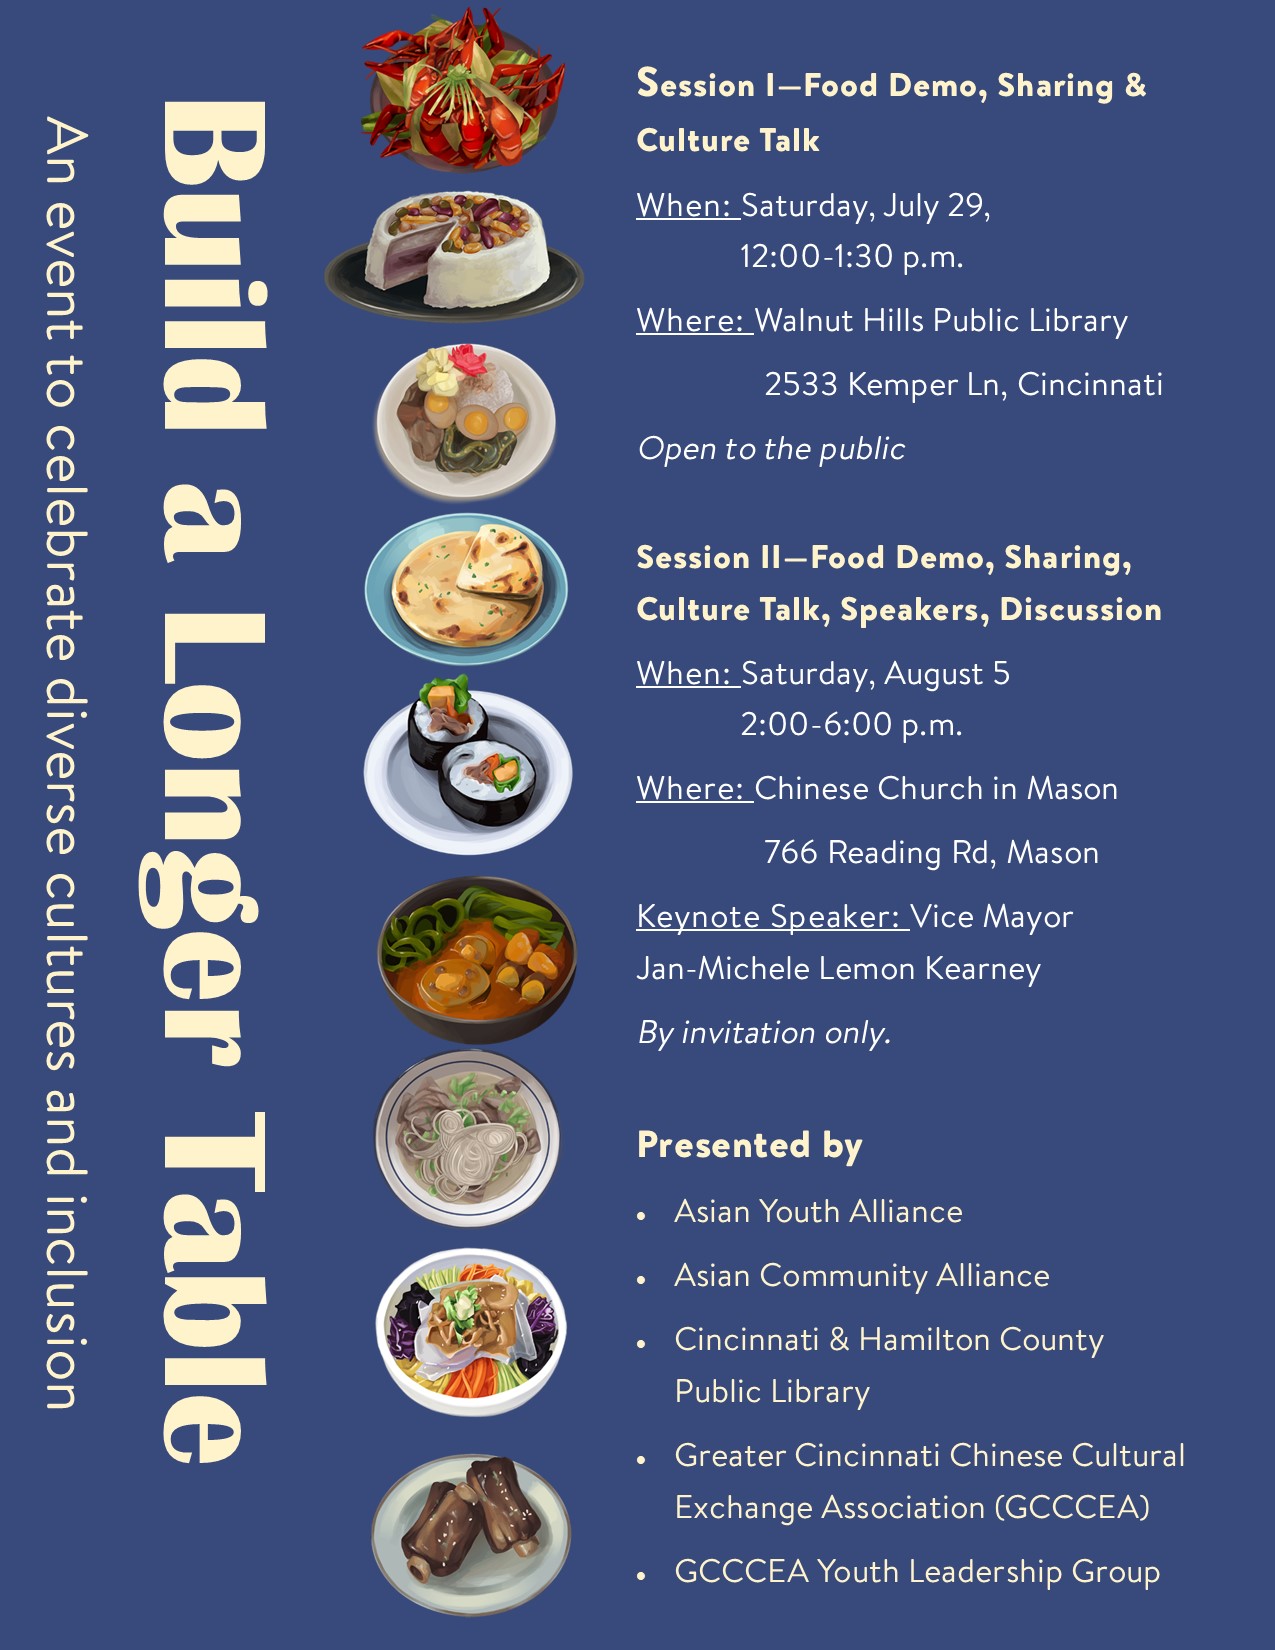 Greater Cincinnati Chinese Cultural Exchange Association Build a Longer Table